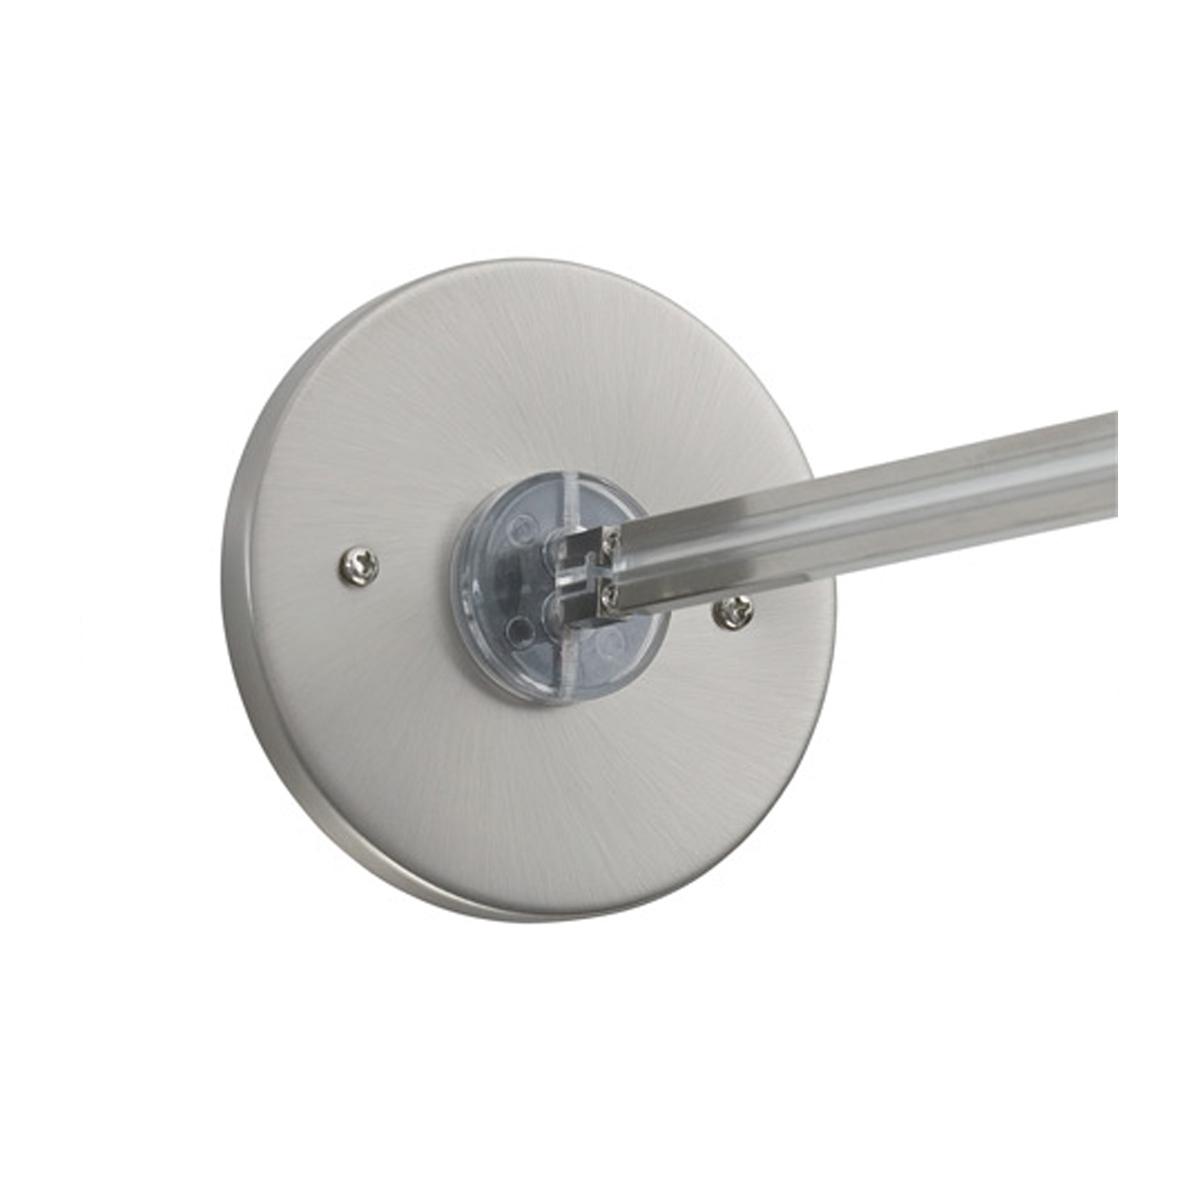 4 In. Monorail Direct-End Power Feed Satin Nickel Finish